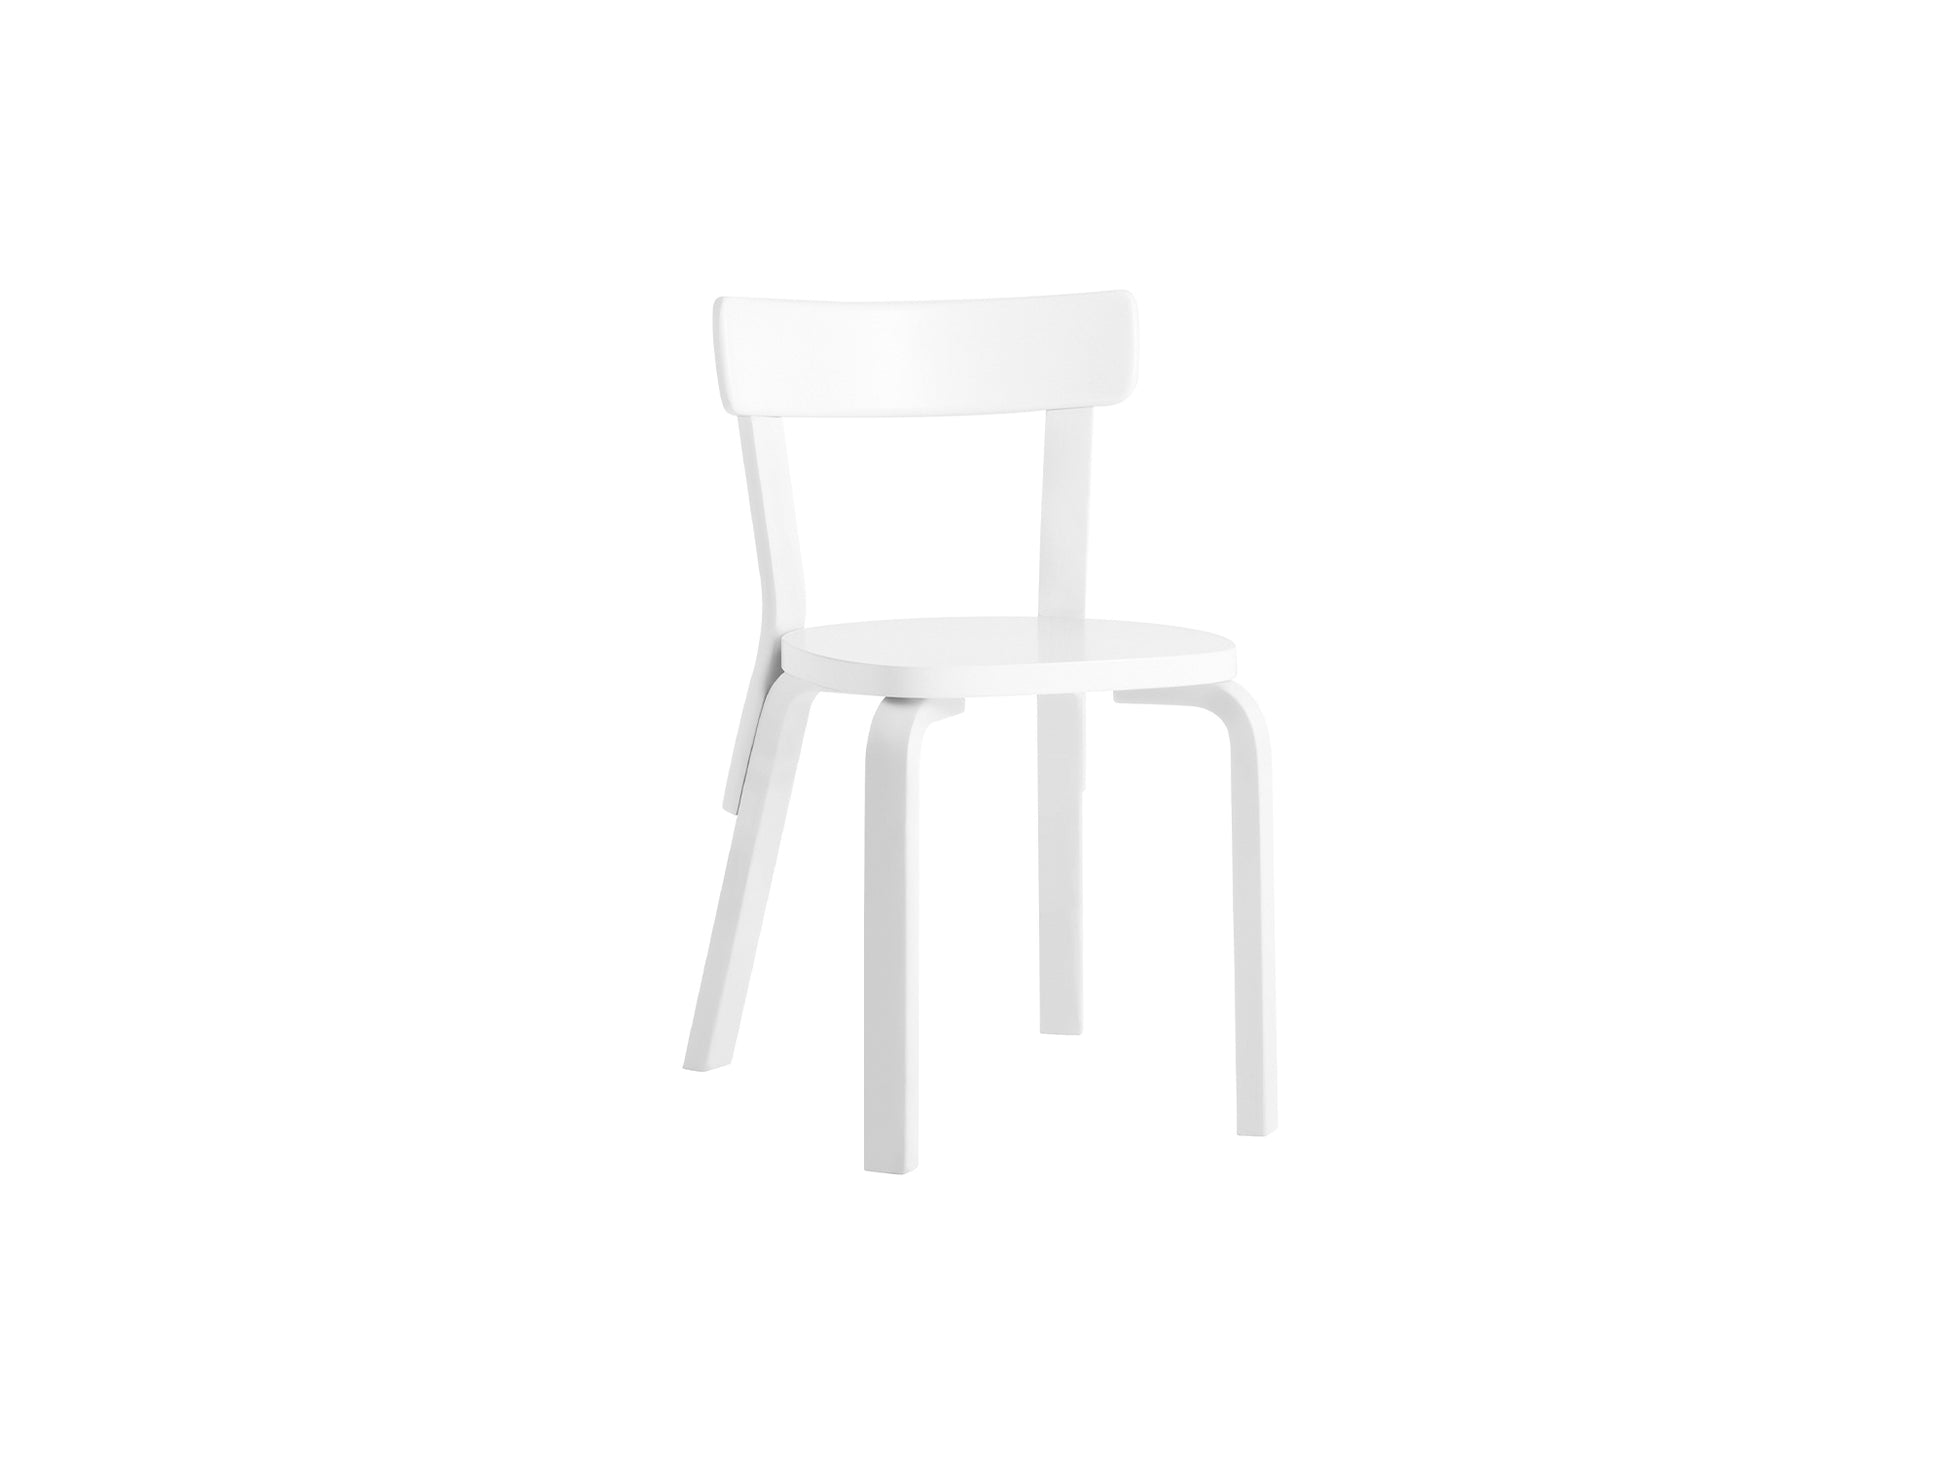 Chair 69 by Artek - Legs and backrest support white lacquered, seat and backrest white lacquered